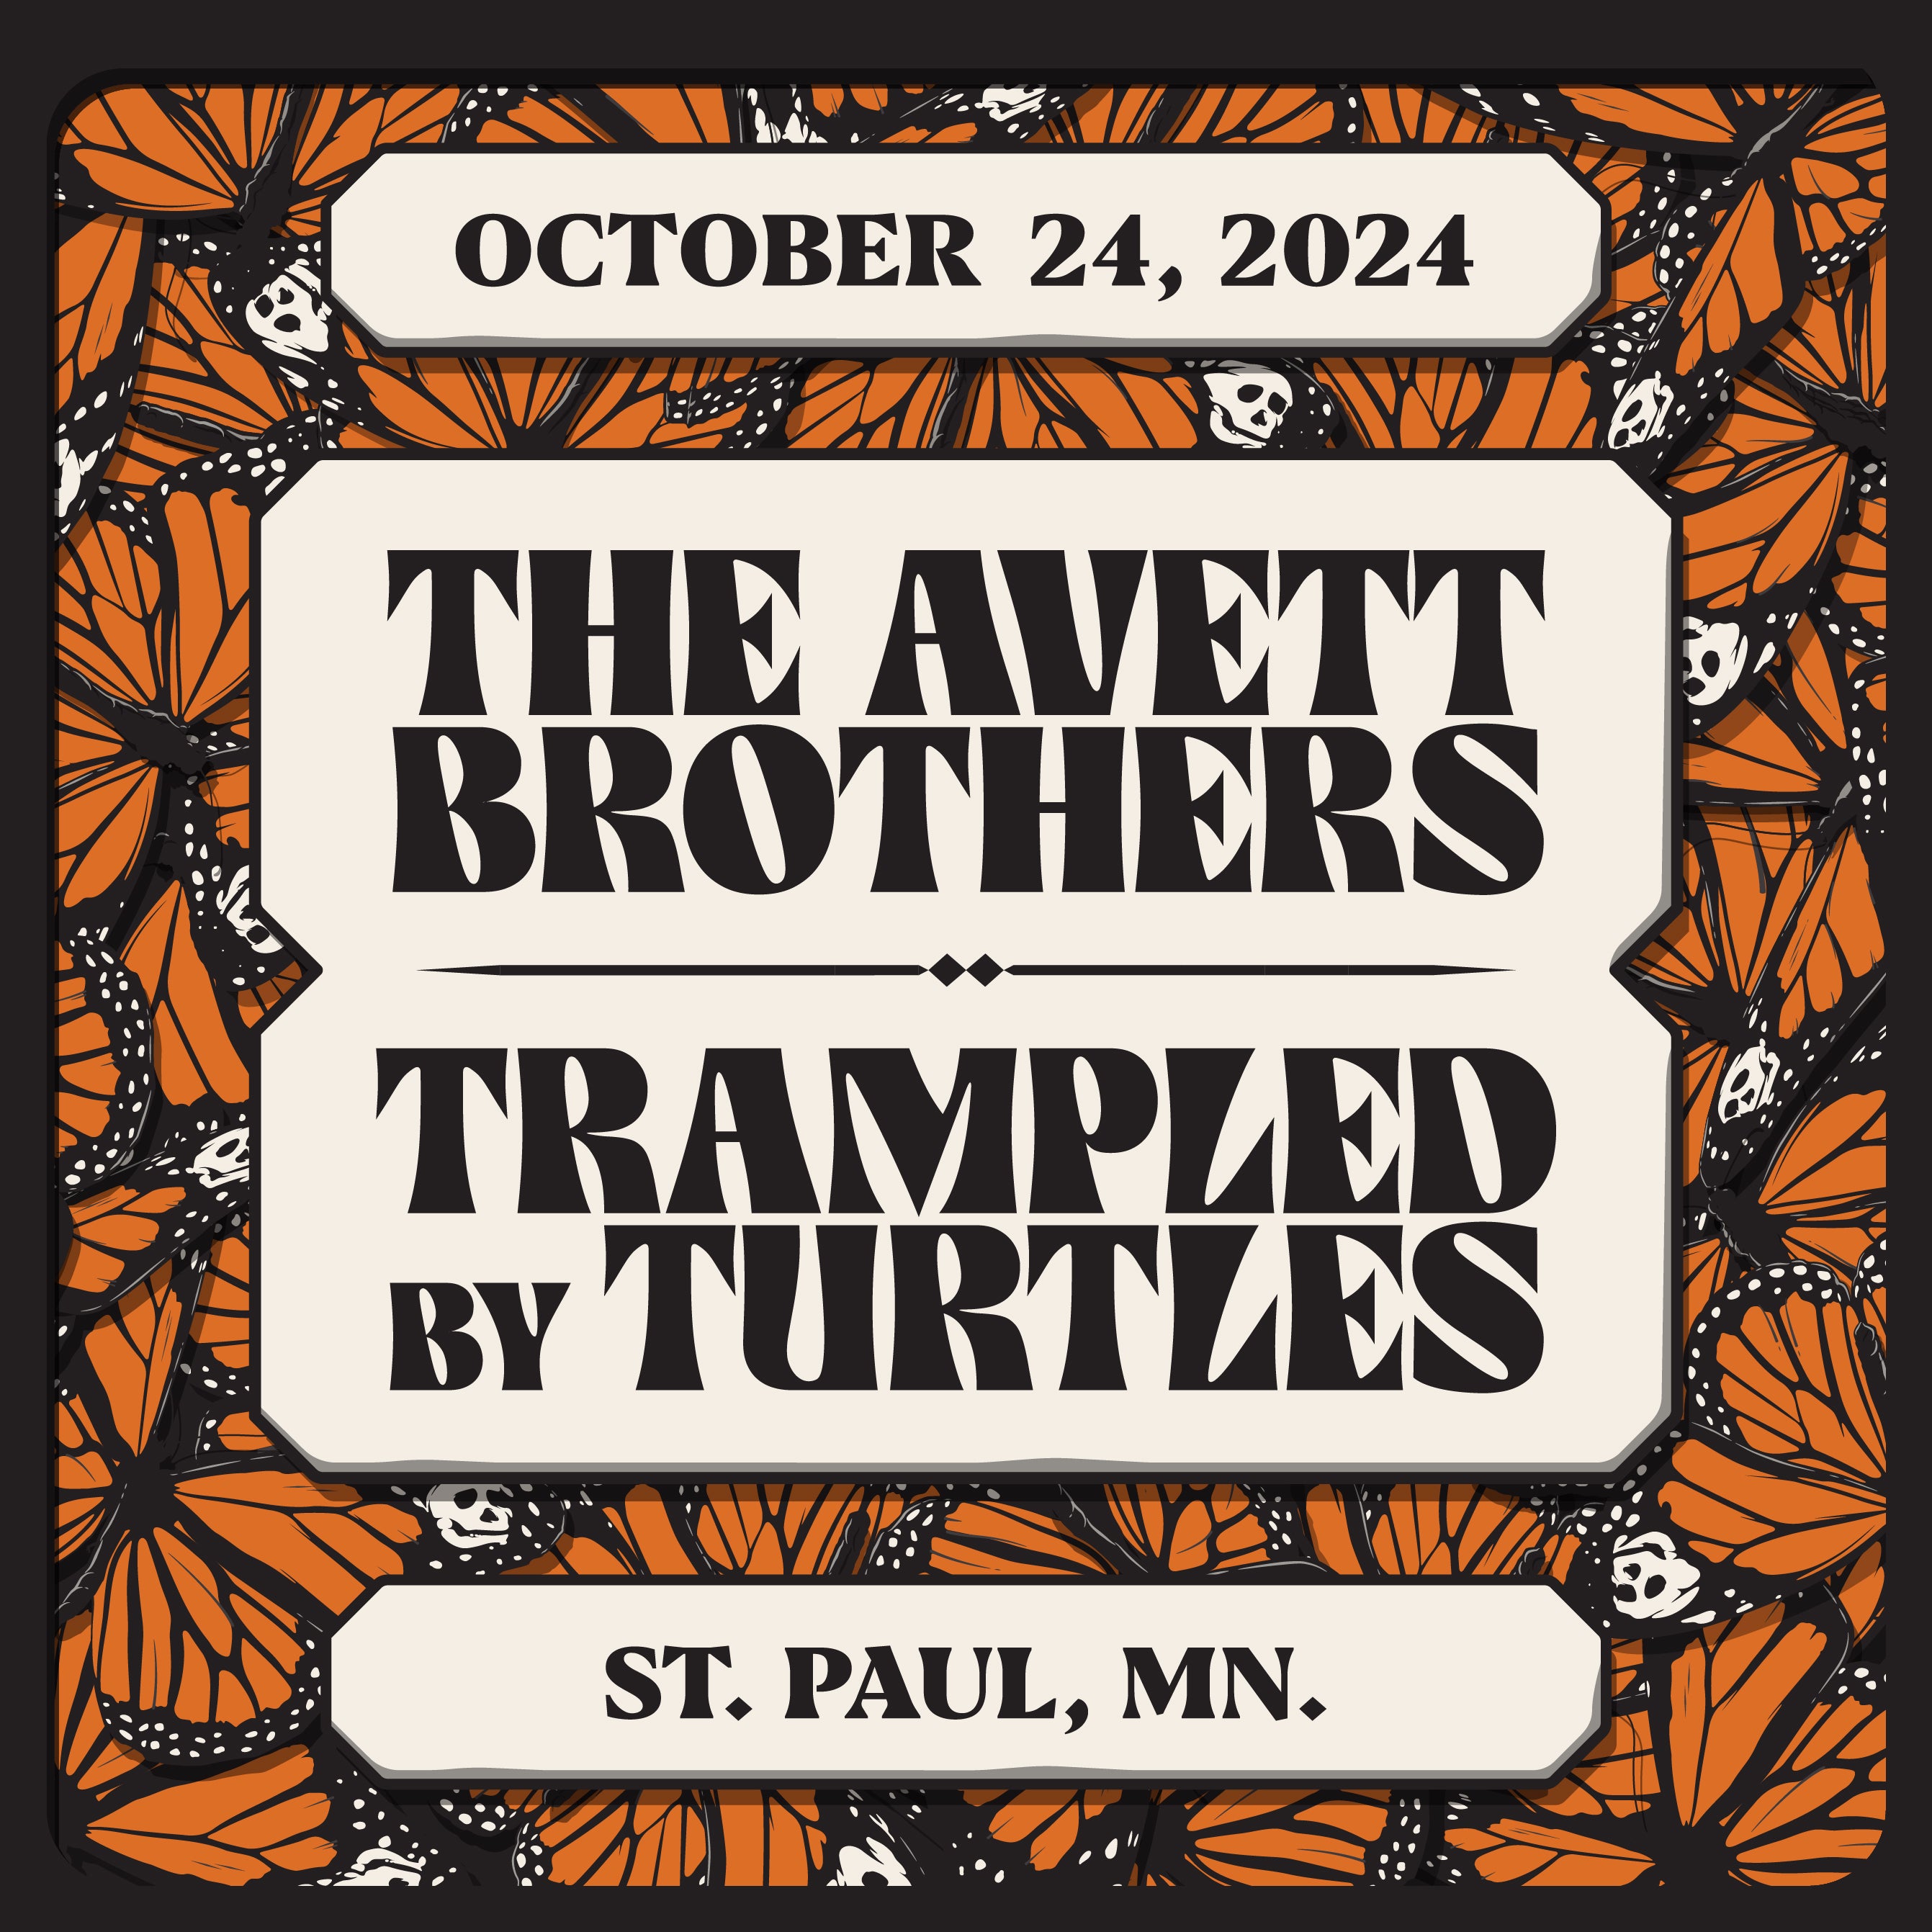 The Avett Brothers/Trampled by Turtles October 24, 2024